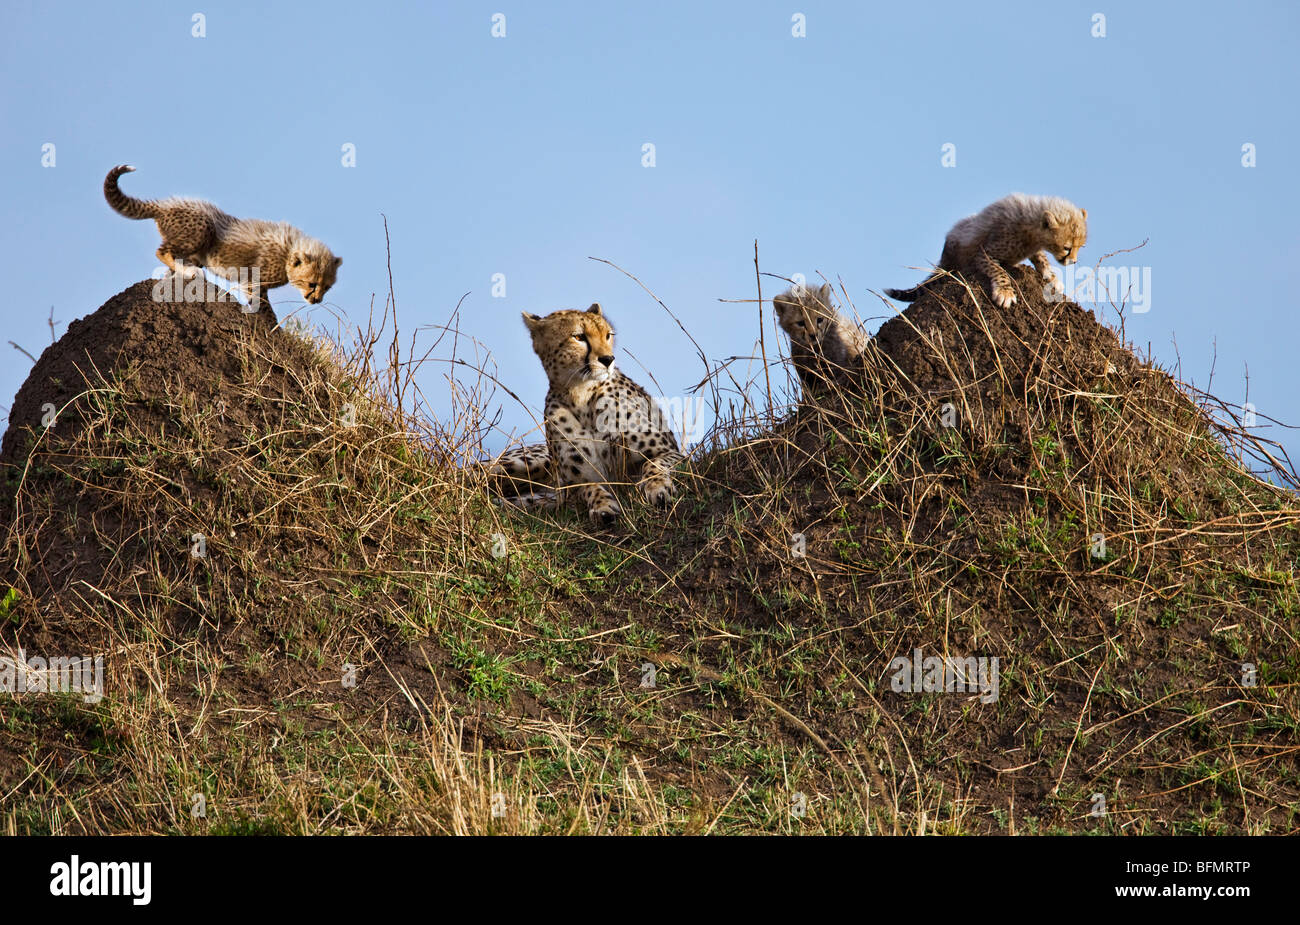 Kenya. A cheetah and her three one-month-old cubs rest and play on termite mounds in Masai Mara National Reserve. Stock Photo